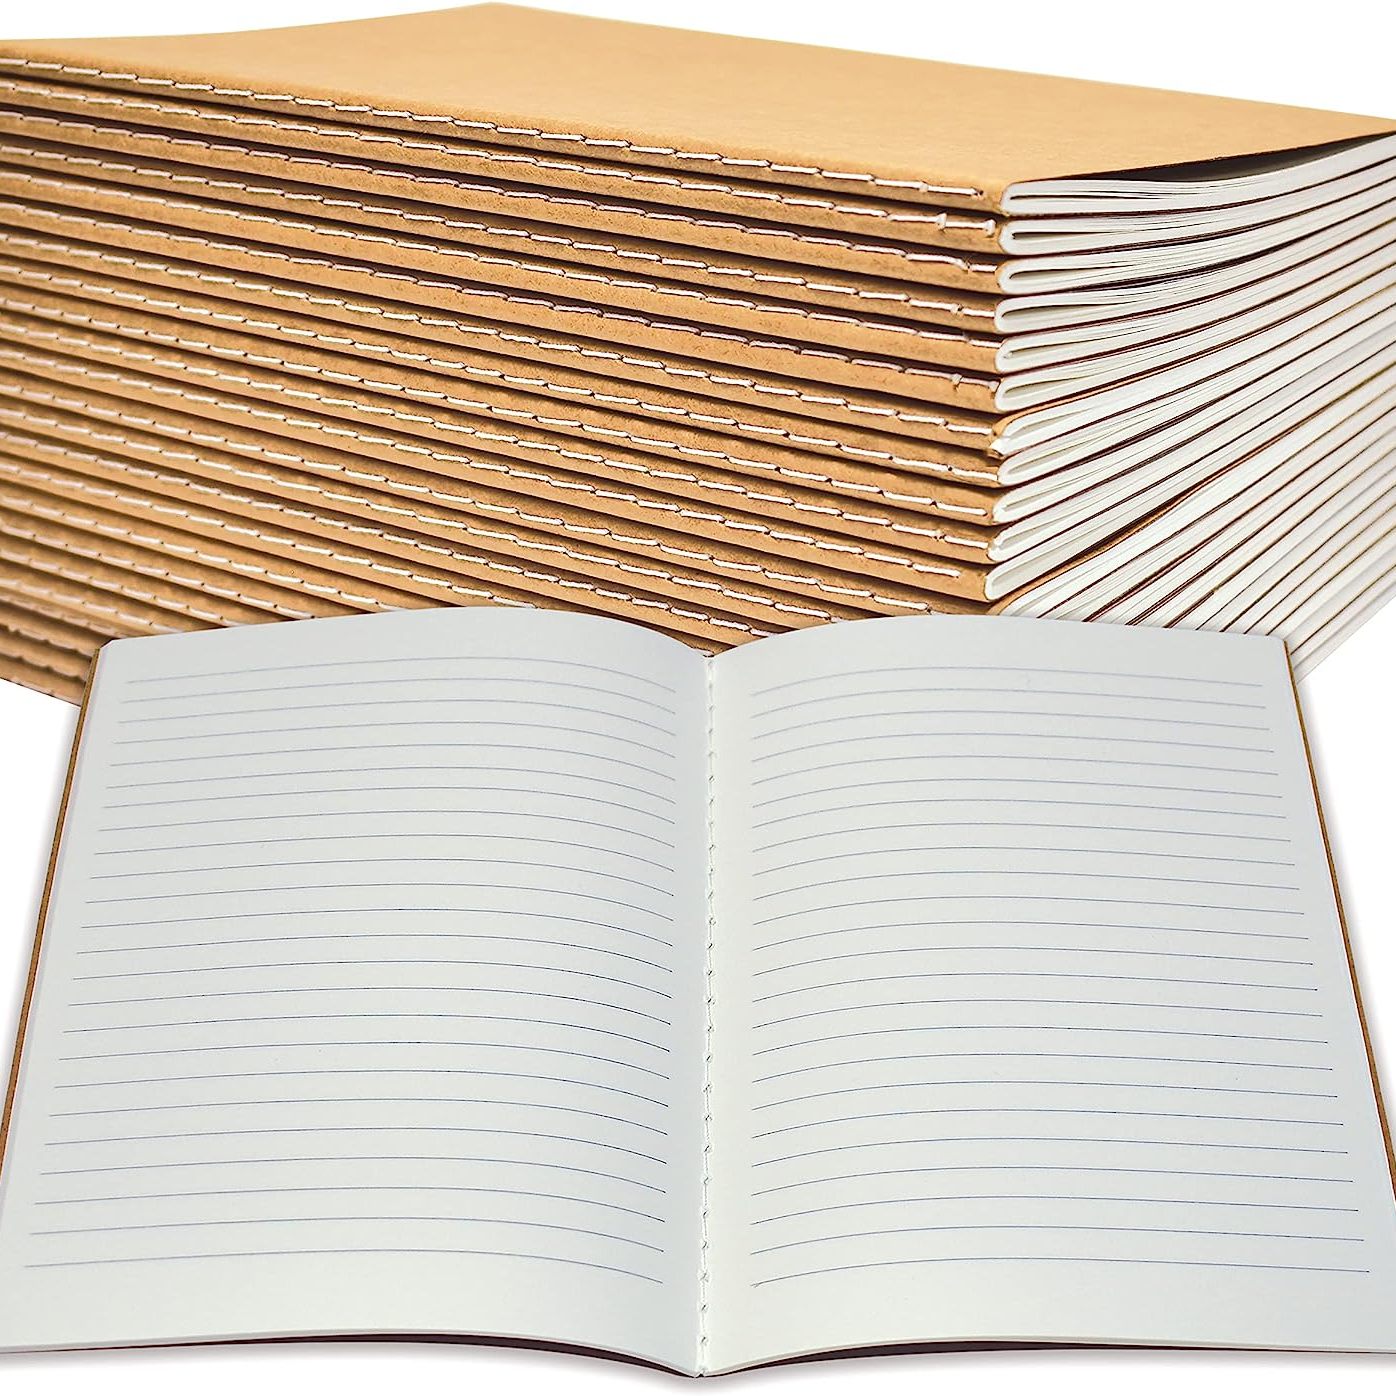 5 Pack Spiral Journal - Small Notebooks Bulk 6 x 8 with 120 Lined Pages  for Work, Students, School, Writing (5 Colors Kraft Paper Covers)